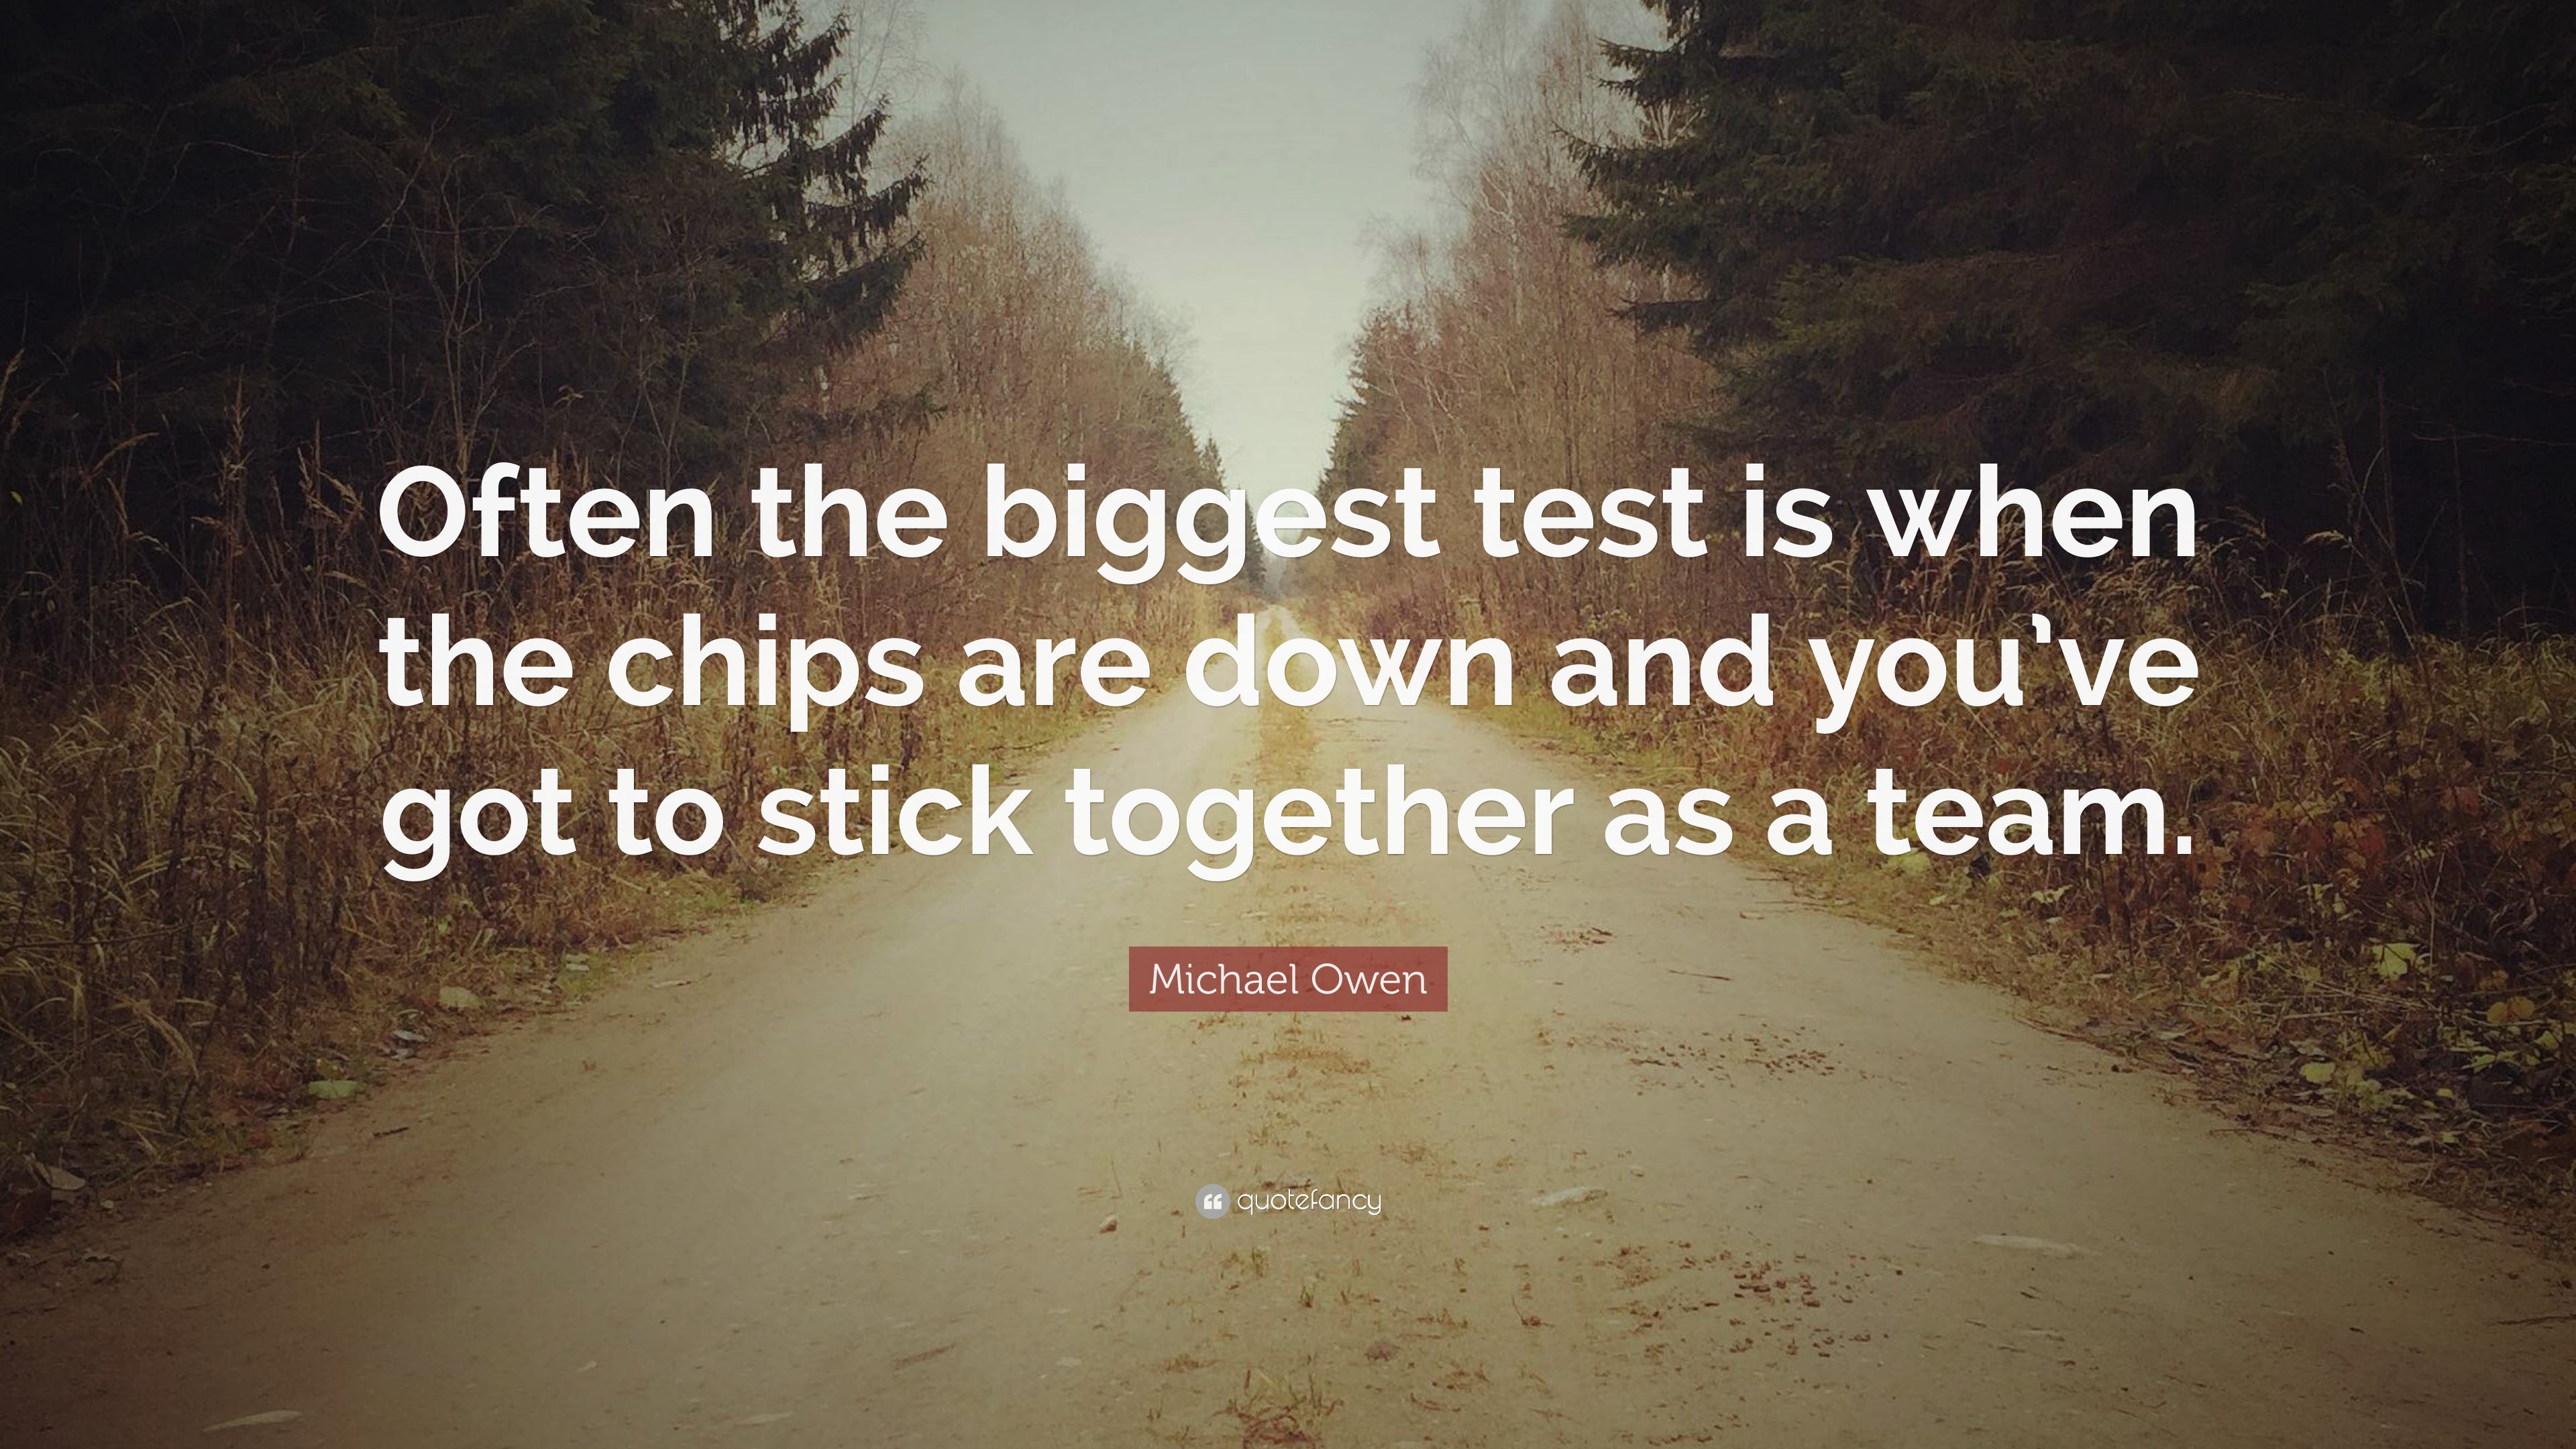 Michael Owen Quote: “Often the biggest test is when